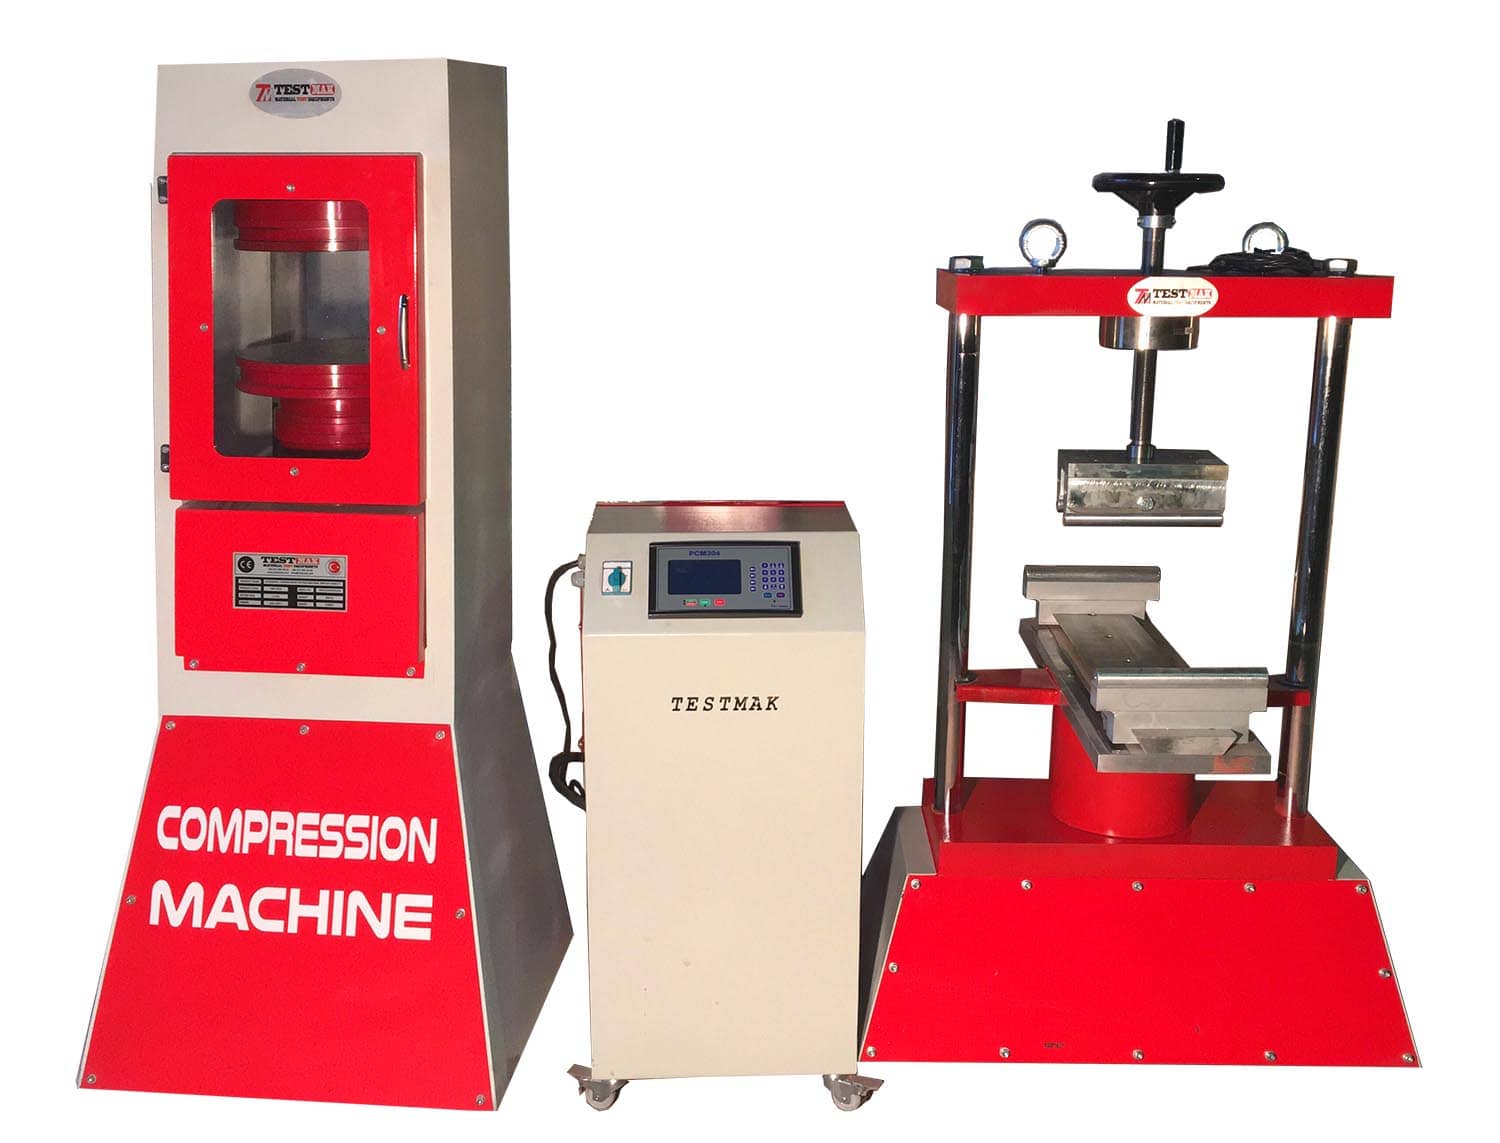 3000 kn Automatic Compression Testing Machine with 200 kn Flexural Frame